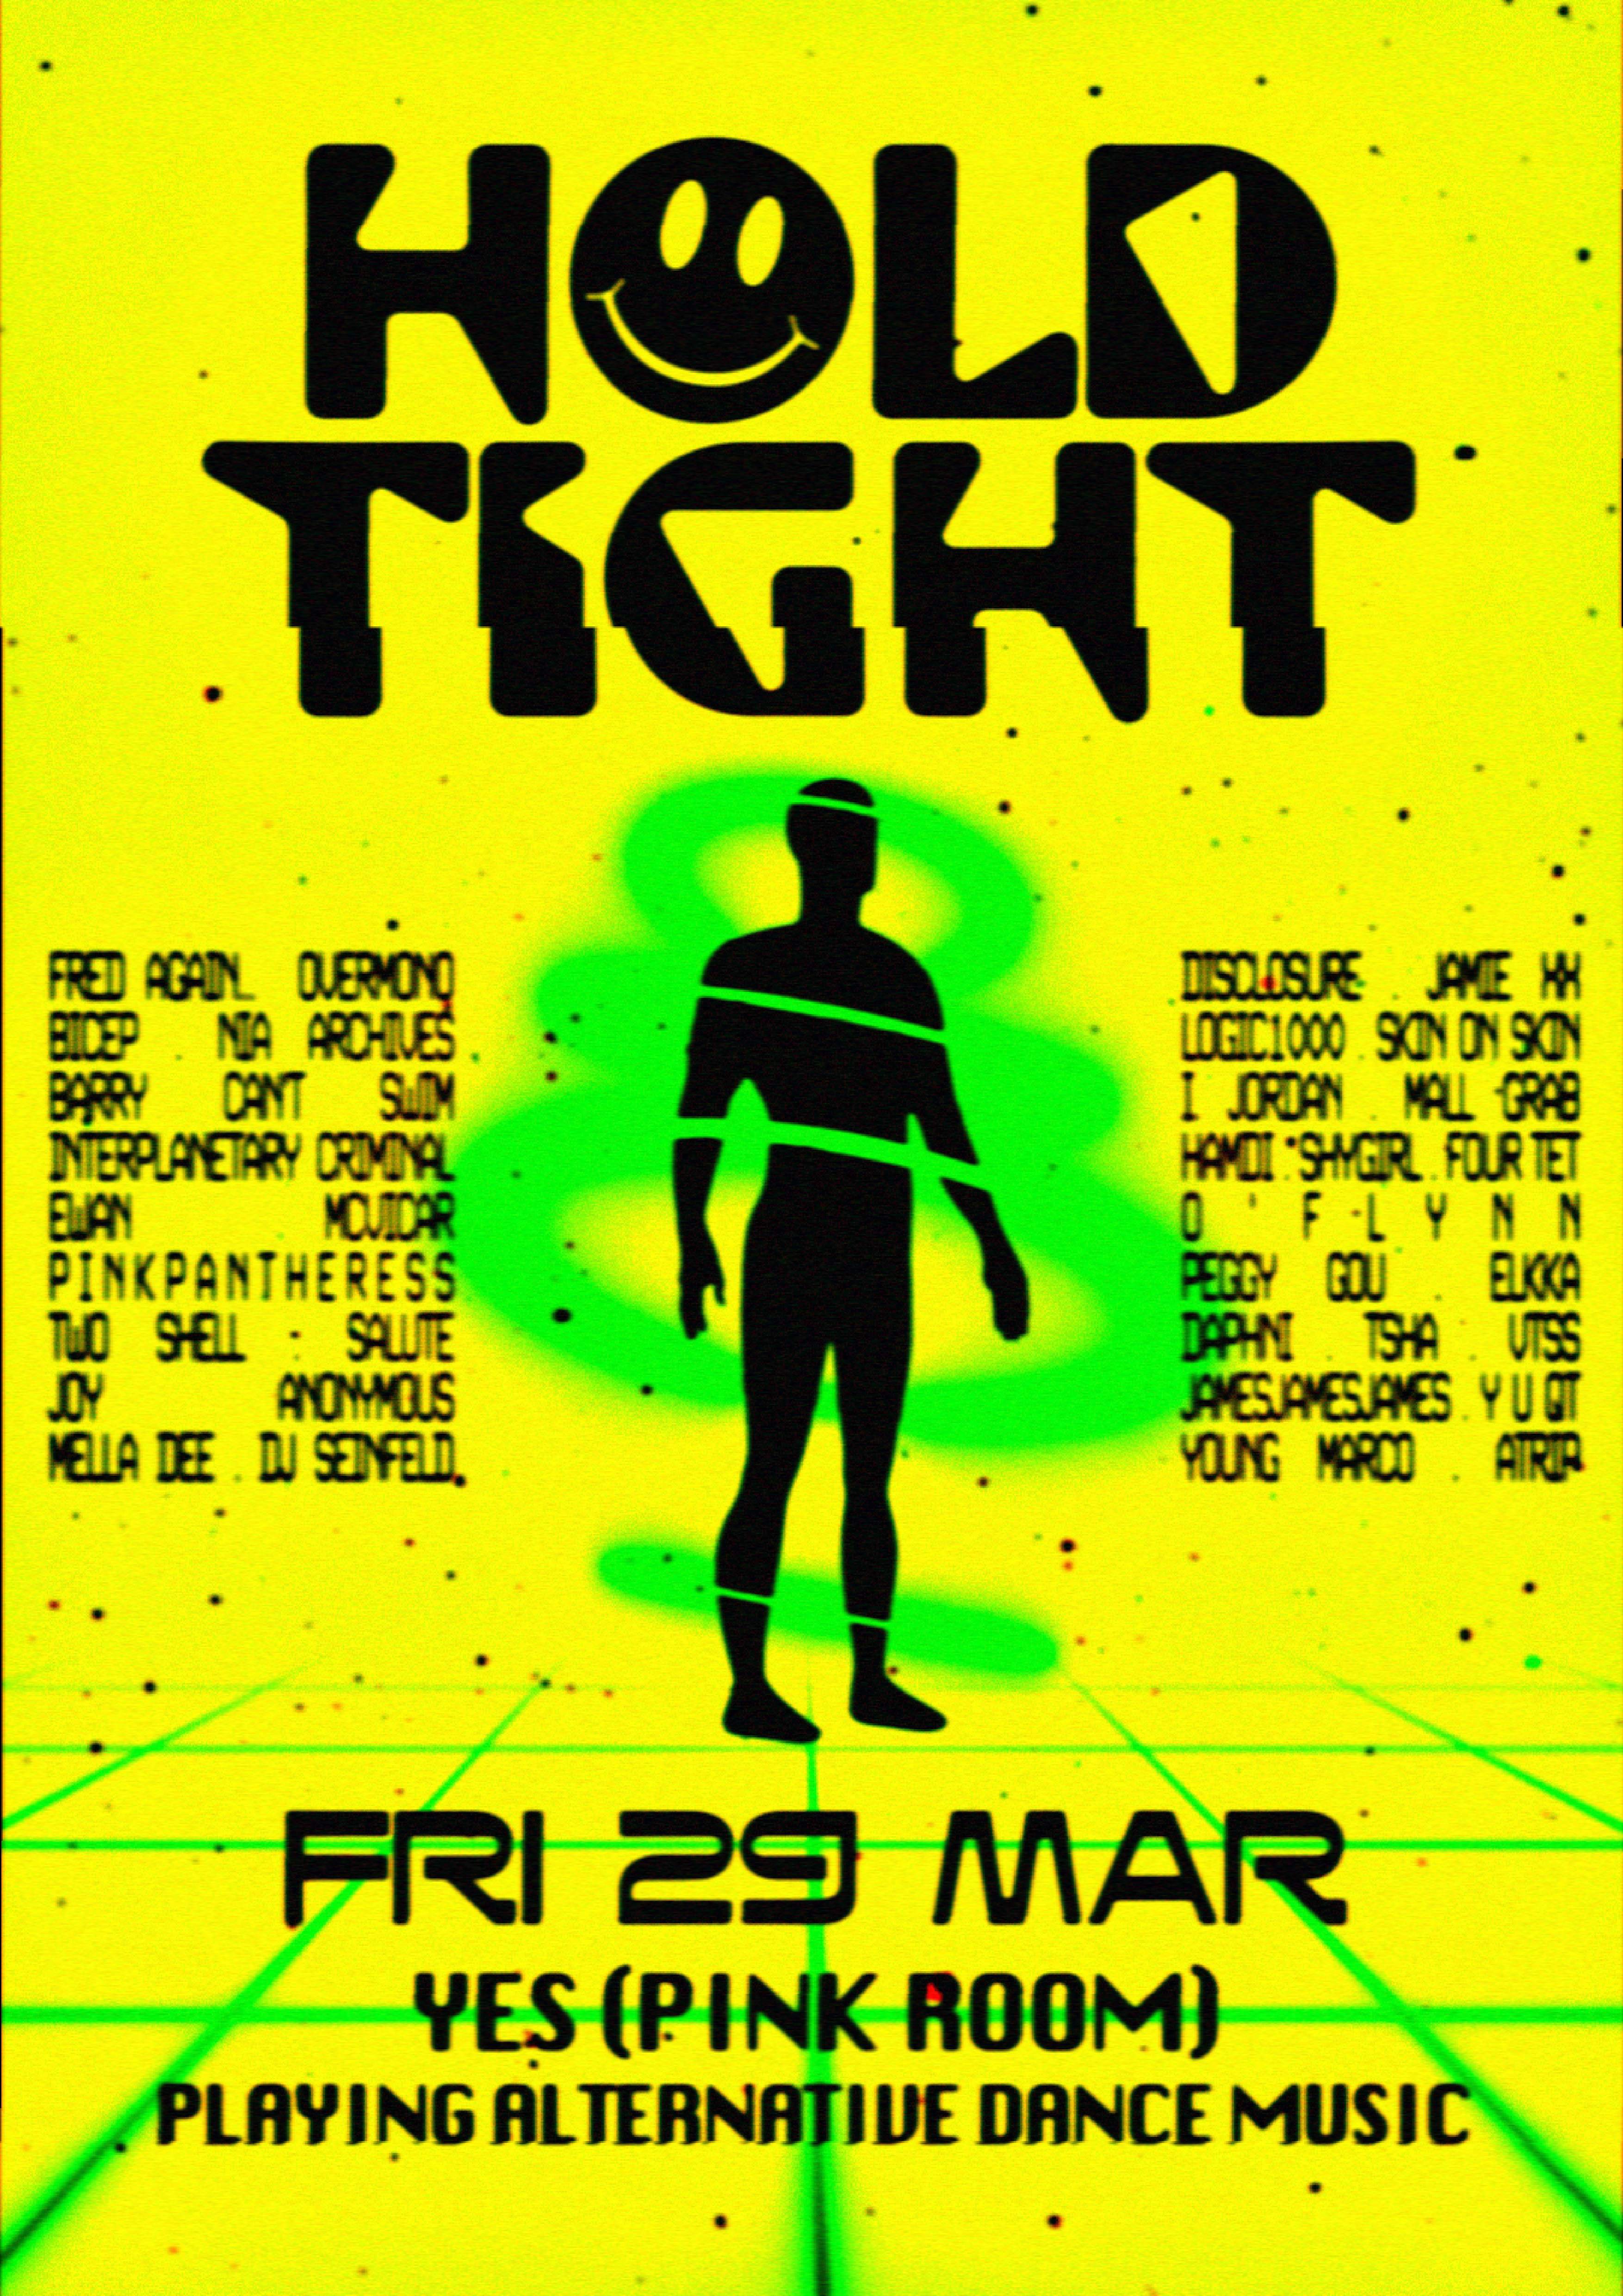 Hold Tight - alternative dance music - Yes - March at Yes